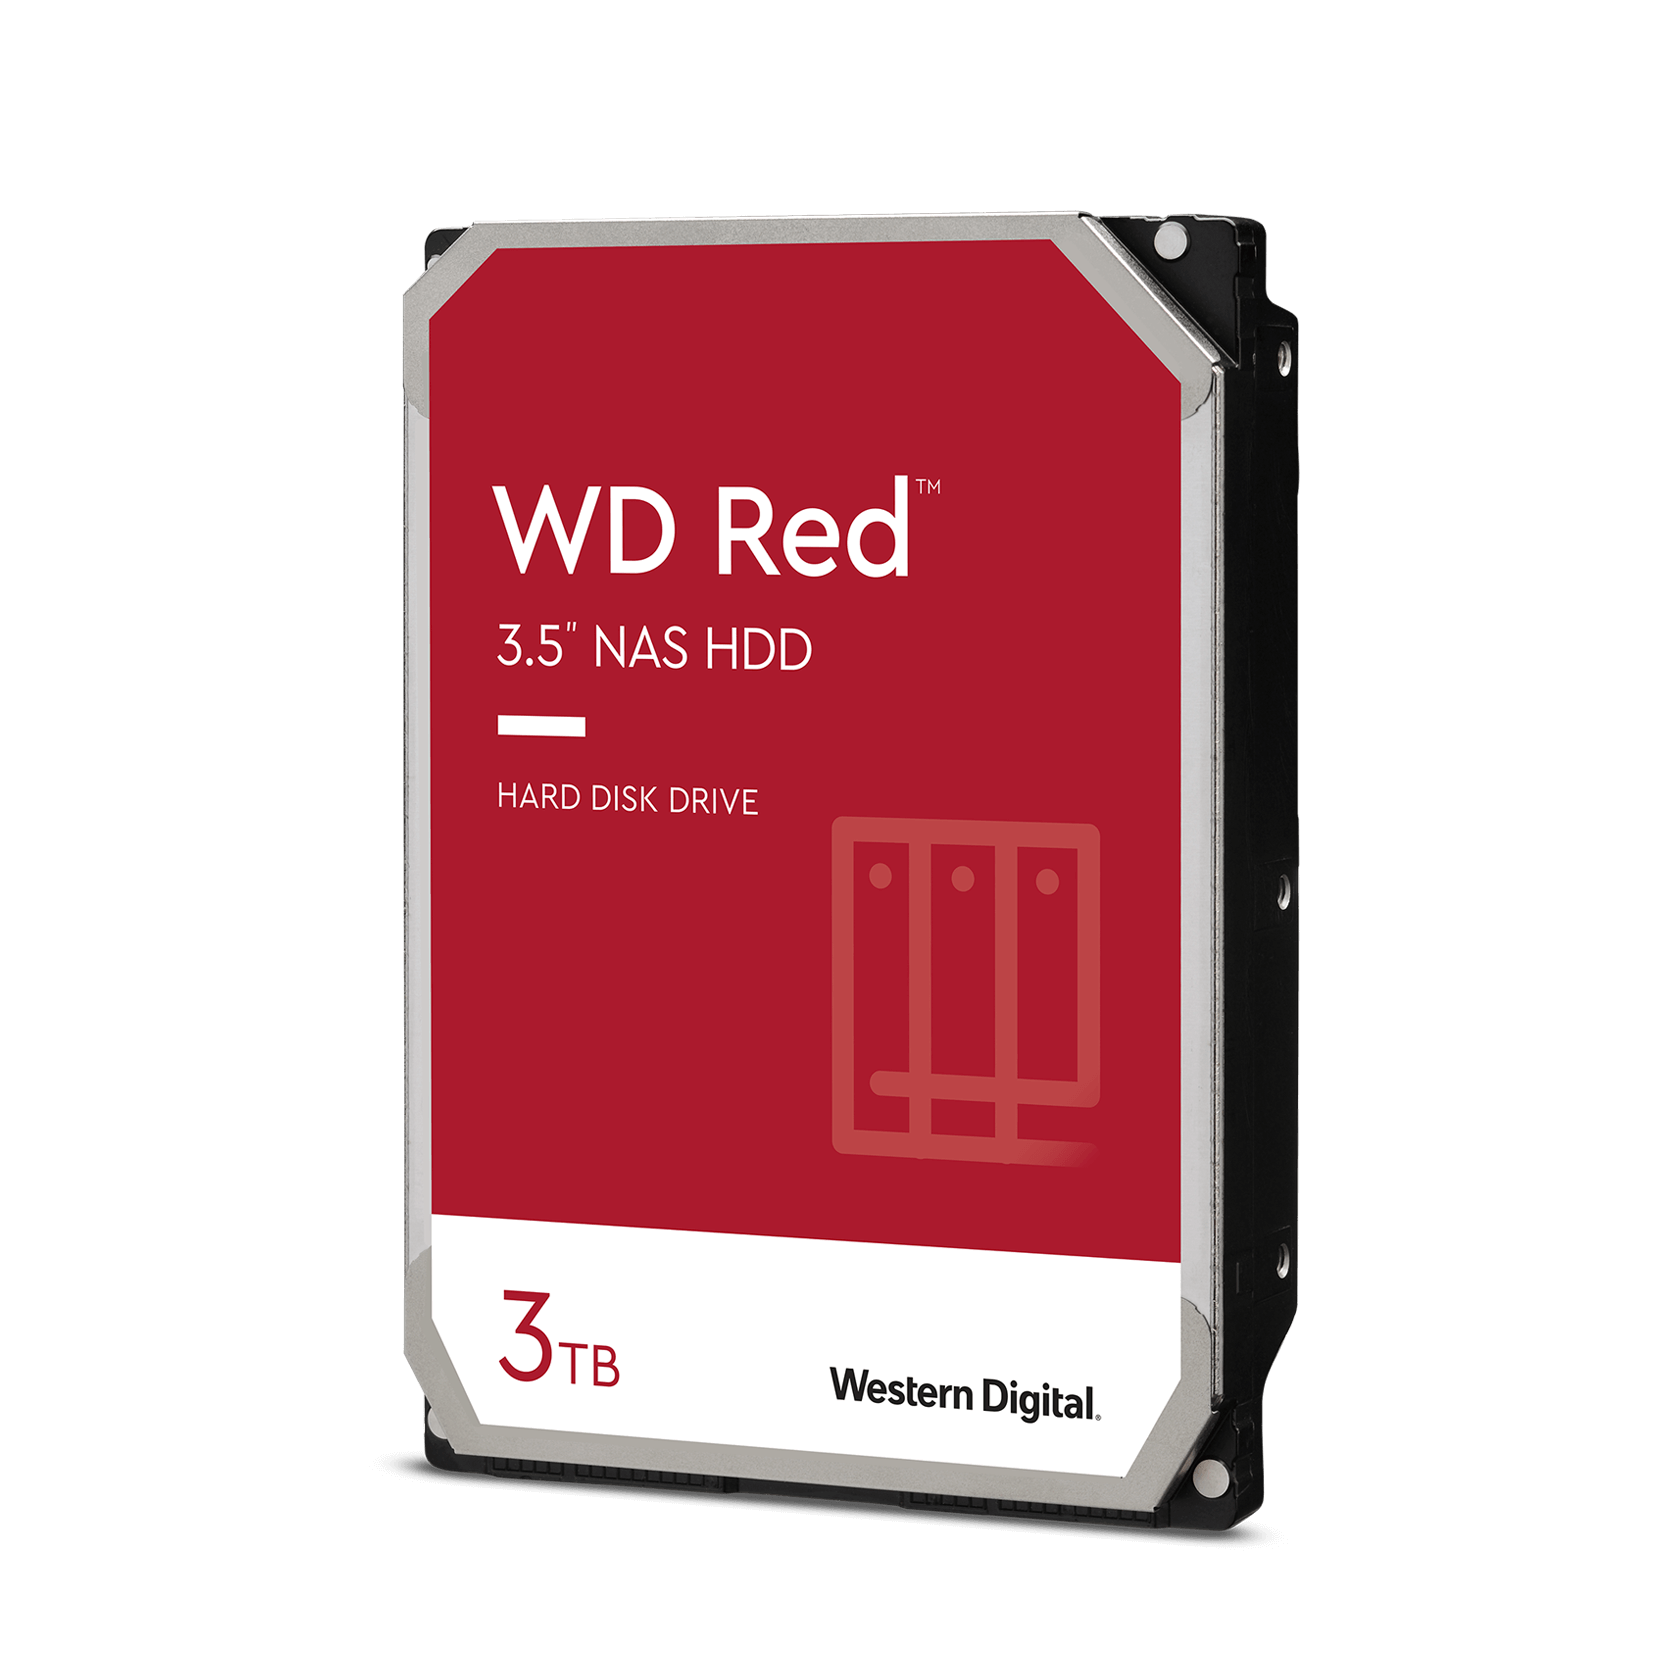 Western Digital 3TB WD Red NAS HDD, Internal 3.5'' Hard Drive, 256MB Cache - WD30EFAX - image 1 of 5